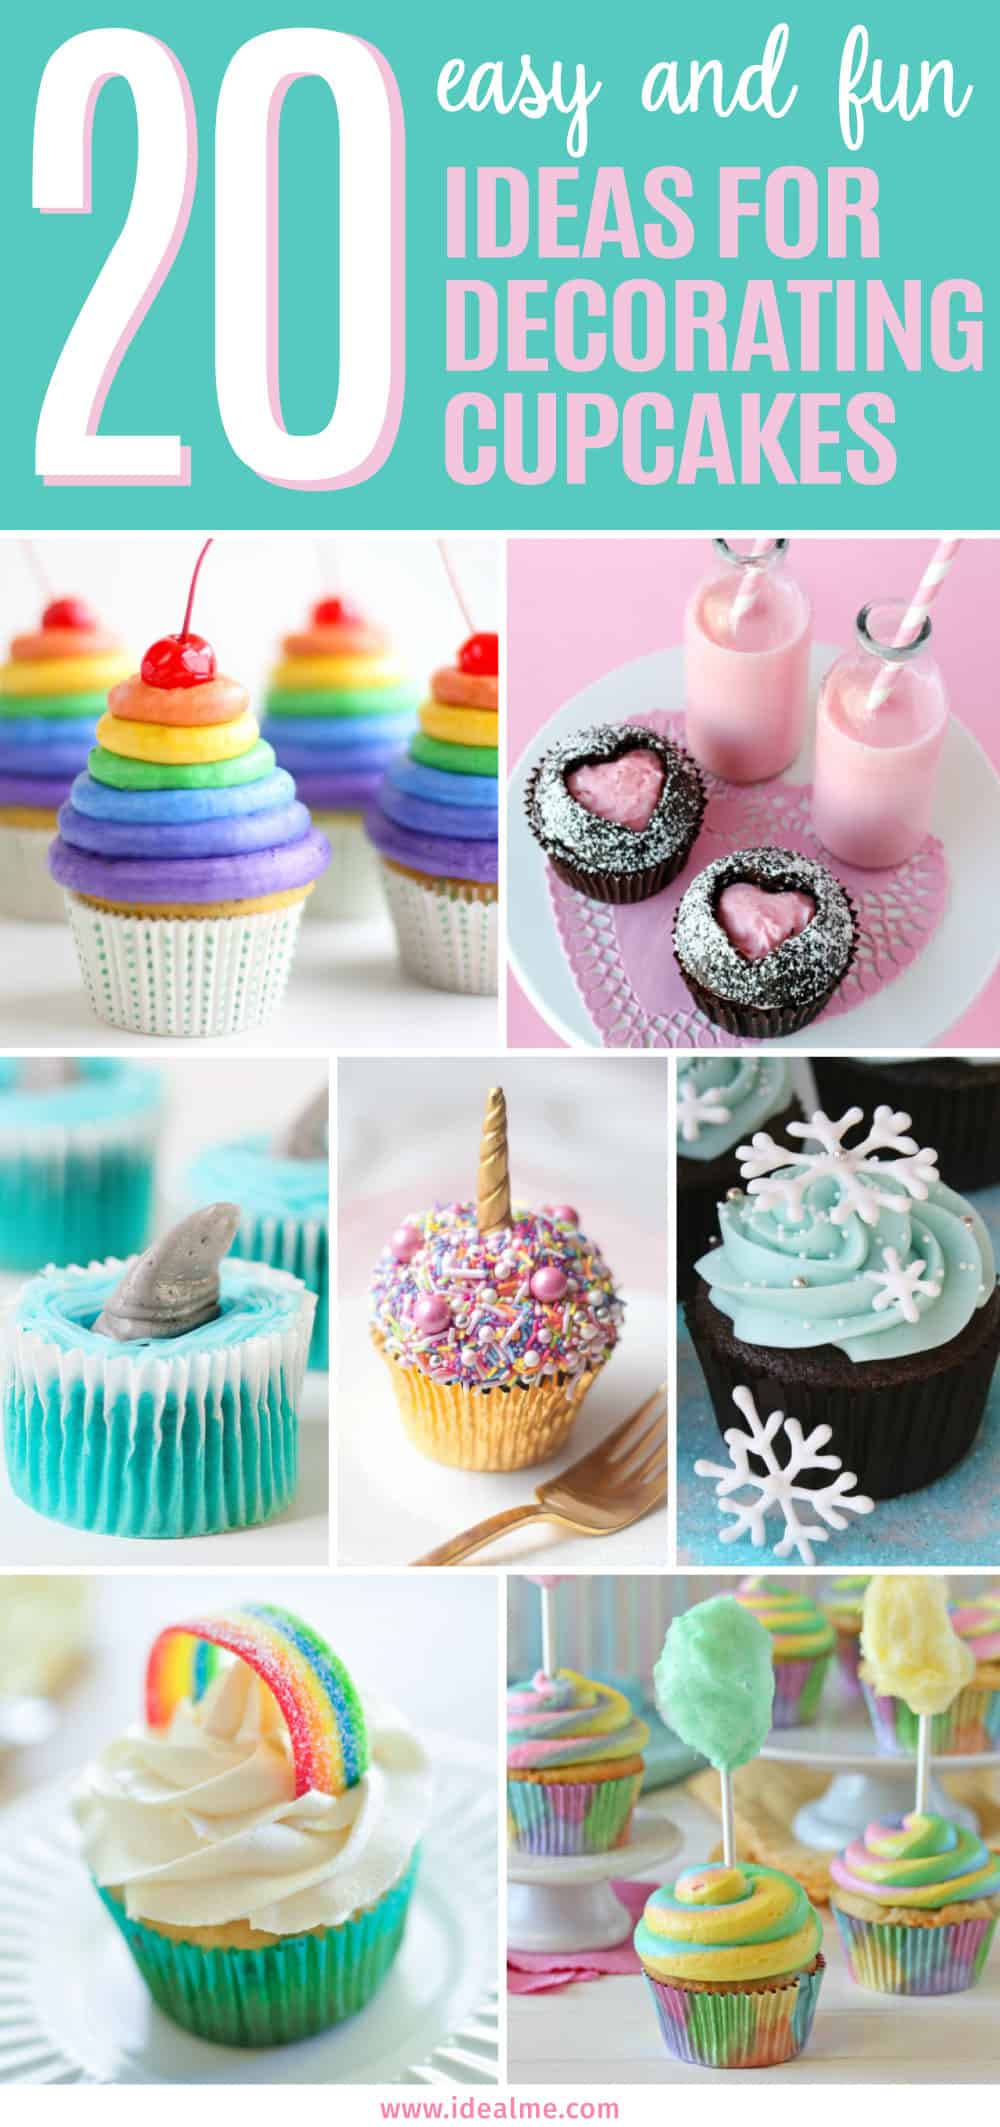 Prepare yourself for cupcakes that are so gorgeous, you may not want to eat them! Here are 20 easy ideas for decorating cupcakes perfect for any occasion.